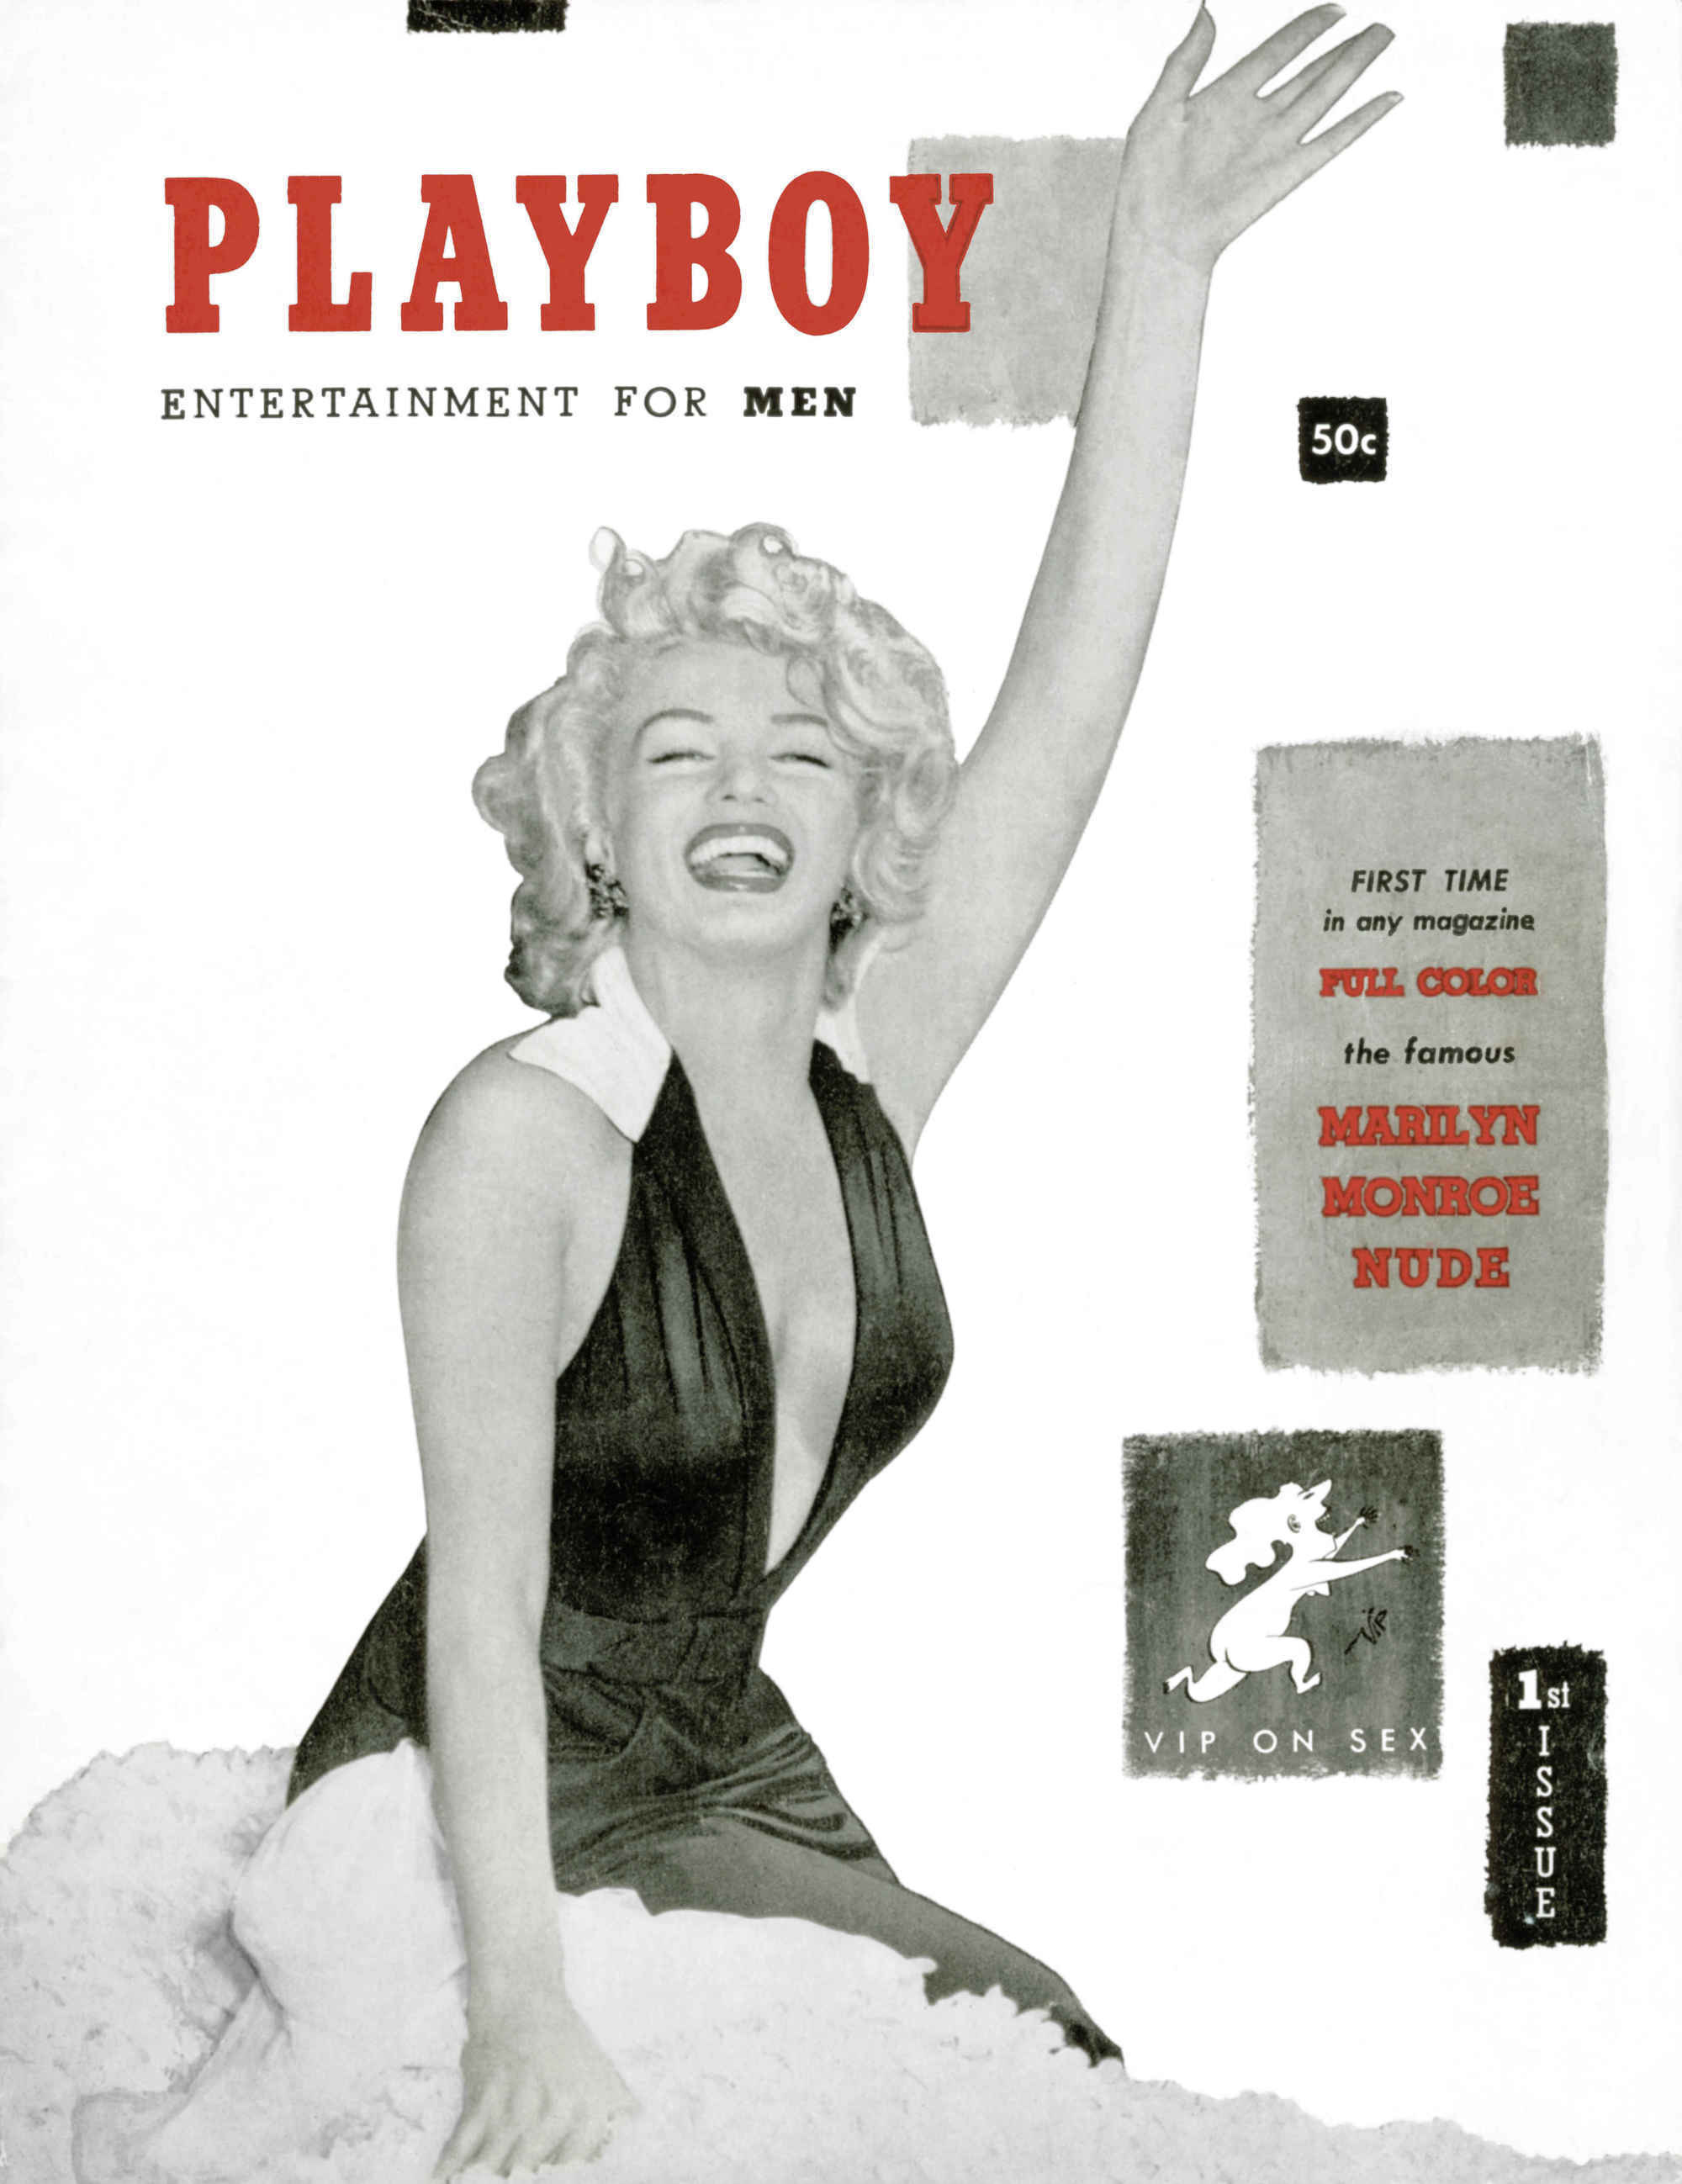 The first issue of Playboy to feature a nude calendar of Marilyn Monroe. 50,000 copies were sold.